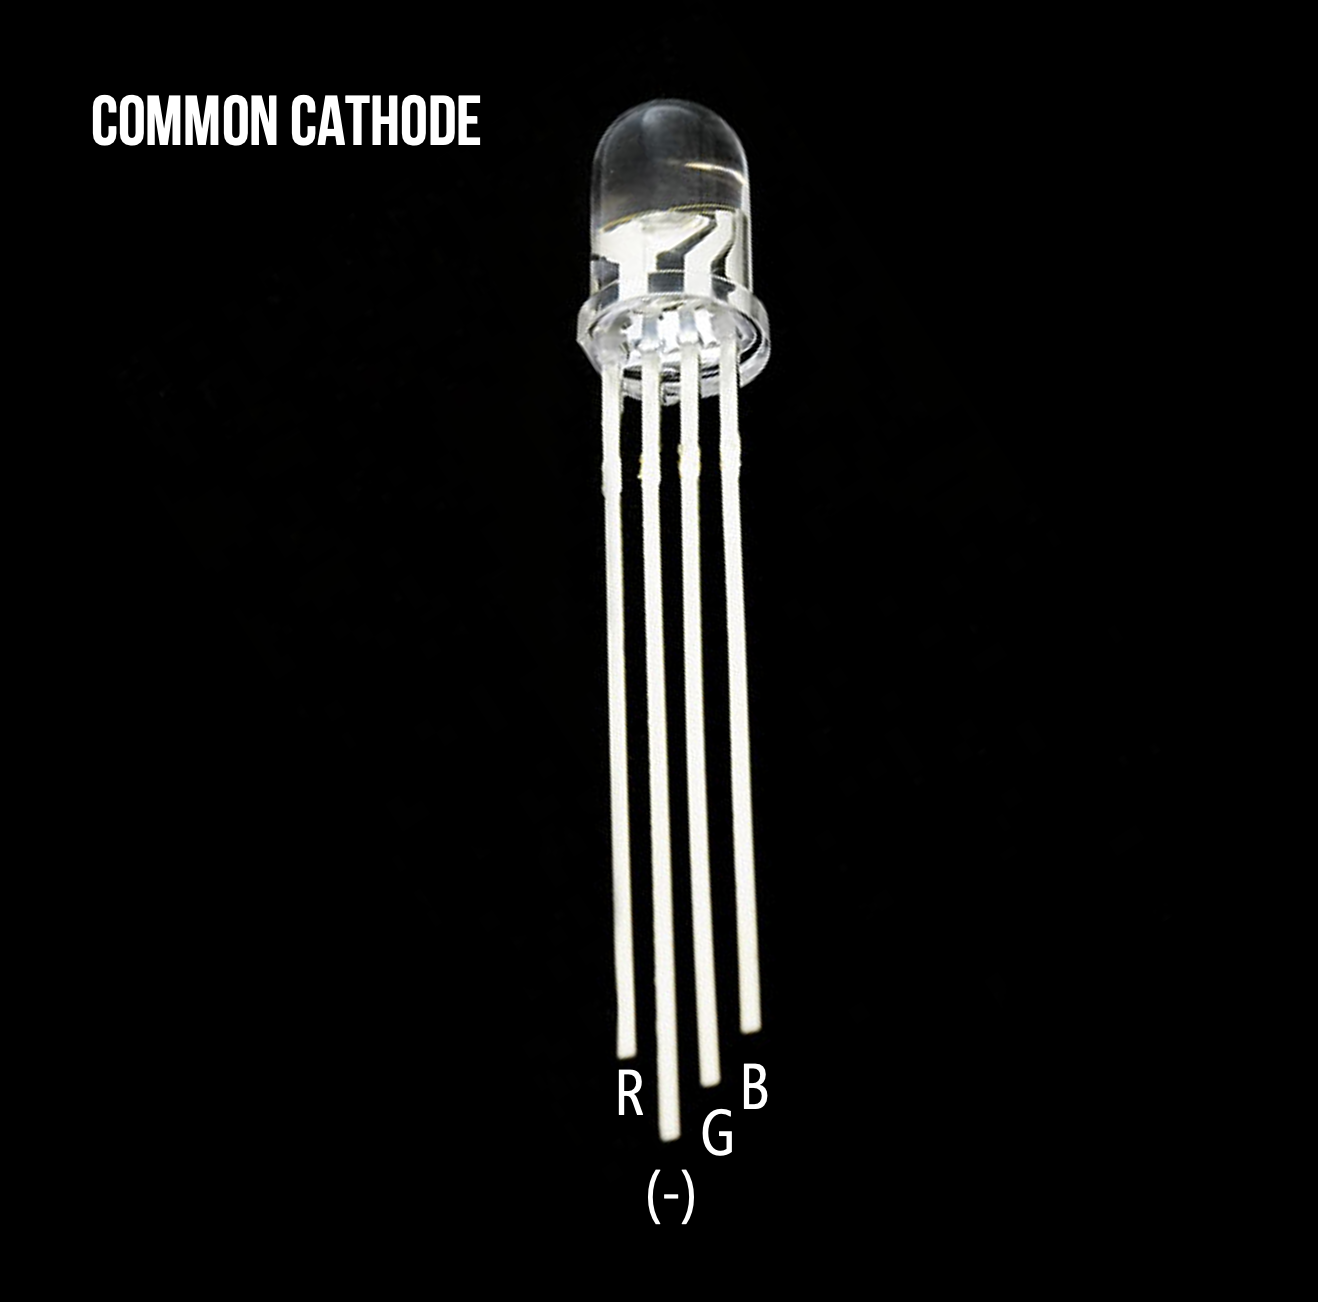 Picture of a Common Anode RGB LED